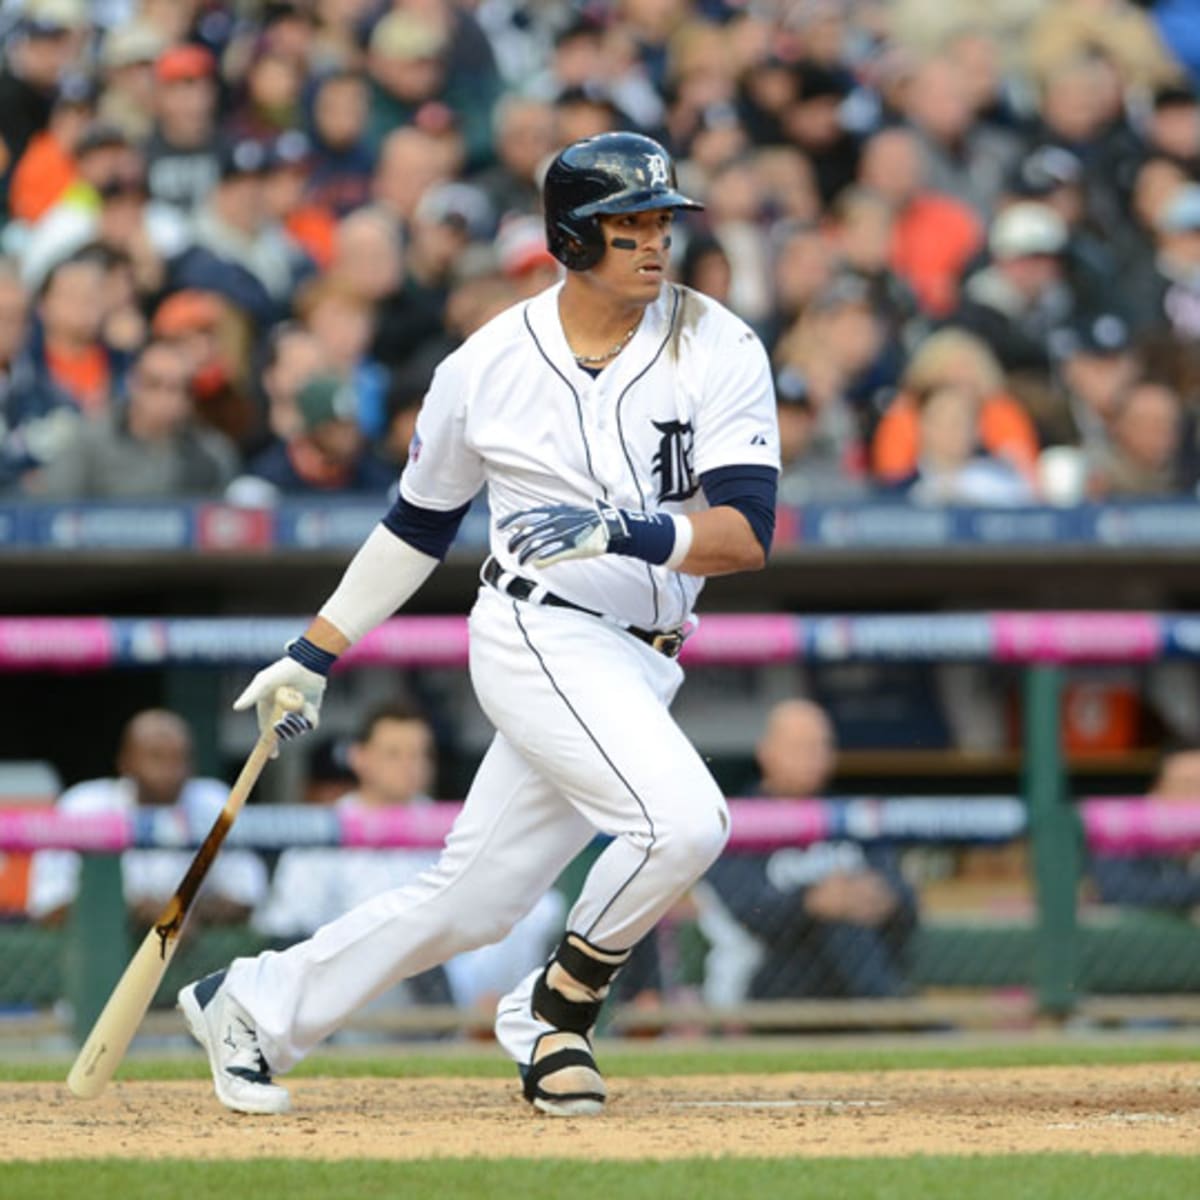 It means a lot': Tigers' Victor Martinez records 1000th career RBI